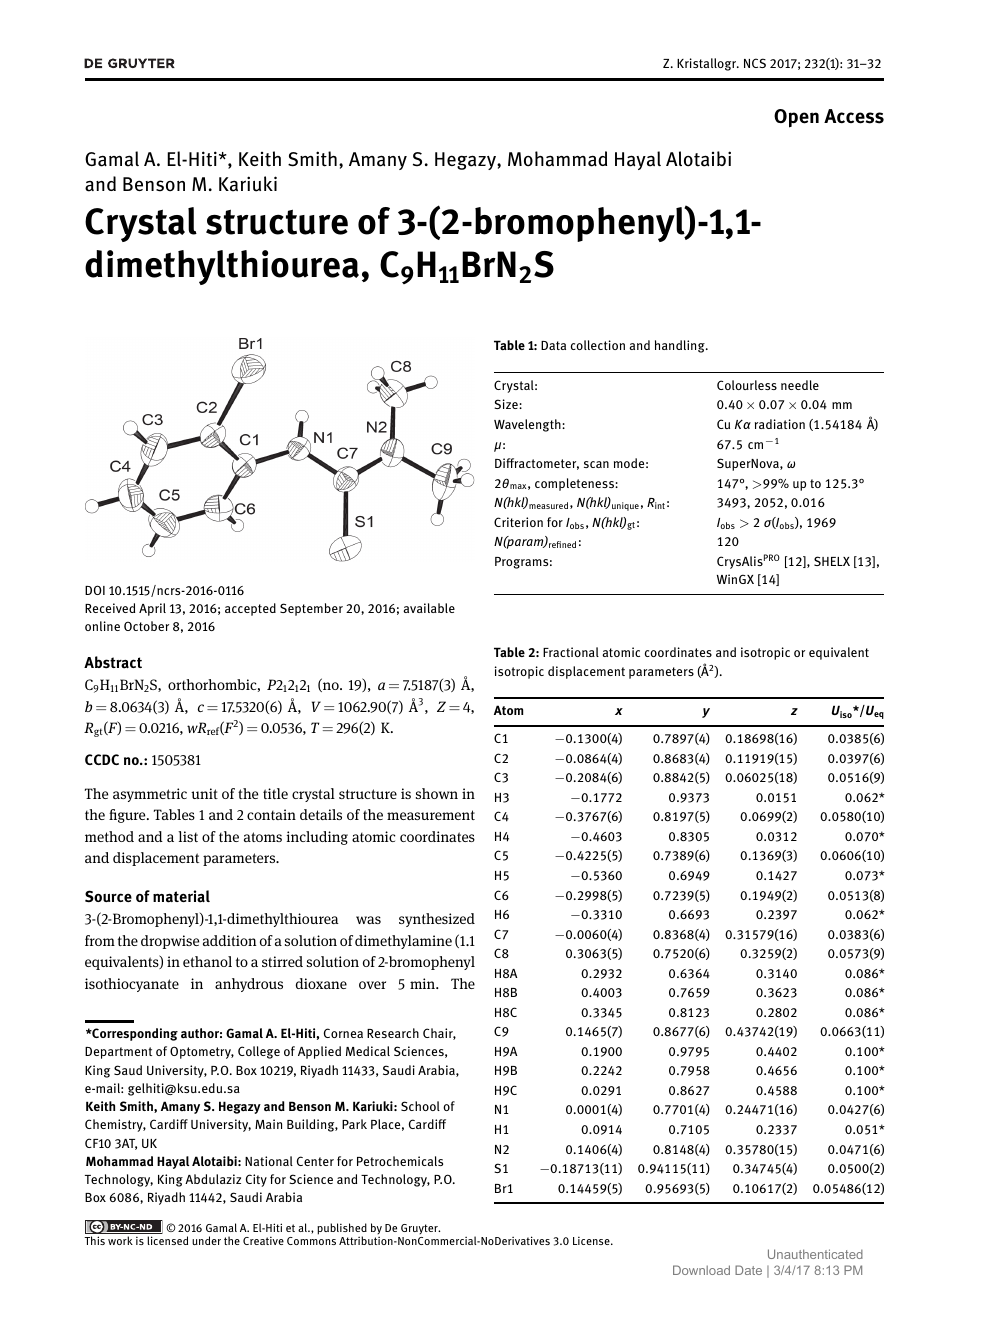 Crystal Structure Of 3 2 Bromophenyl 1 1 Dimethylthiourea C9h11brn2s Topic Of Research Paper In Chemical Sciences Download Scholarly Article Pdf And Read For Free On Cyberleninka Open Science Hub